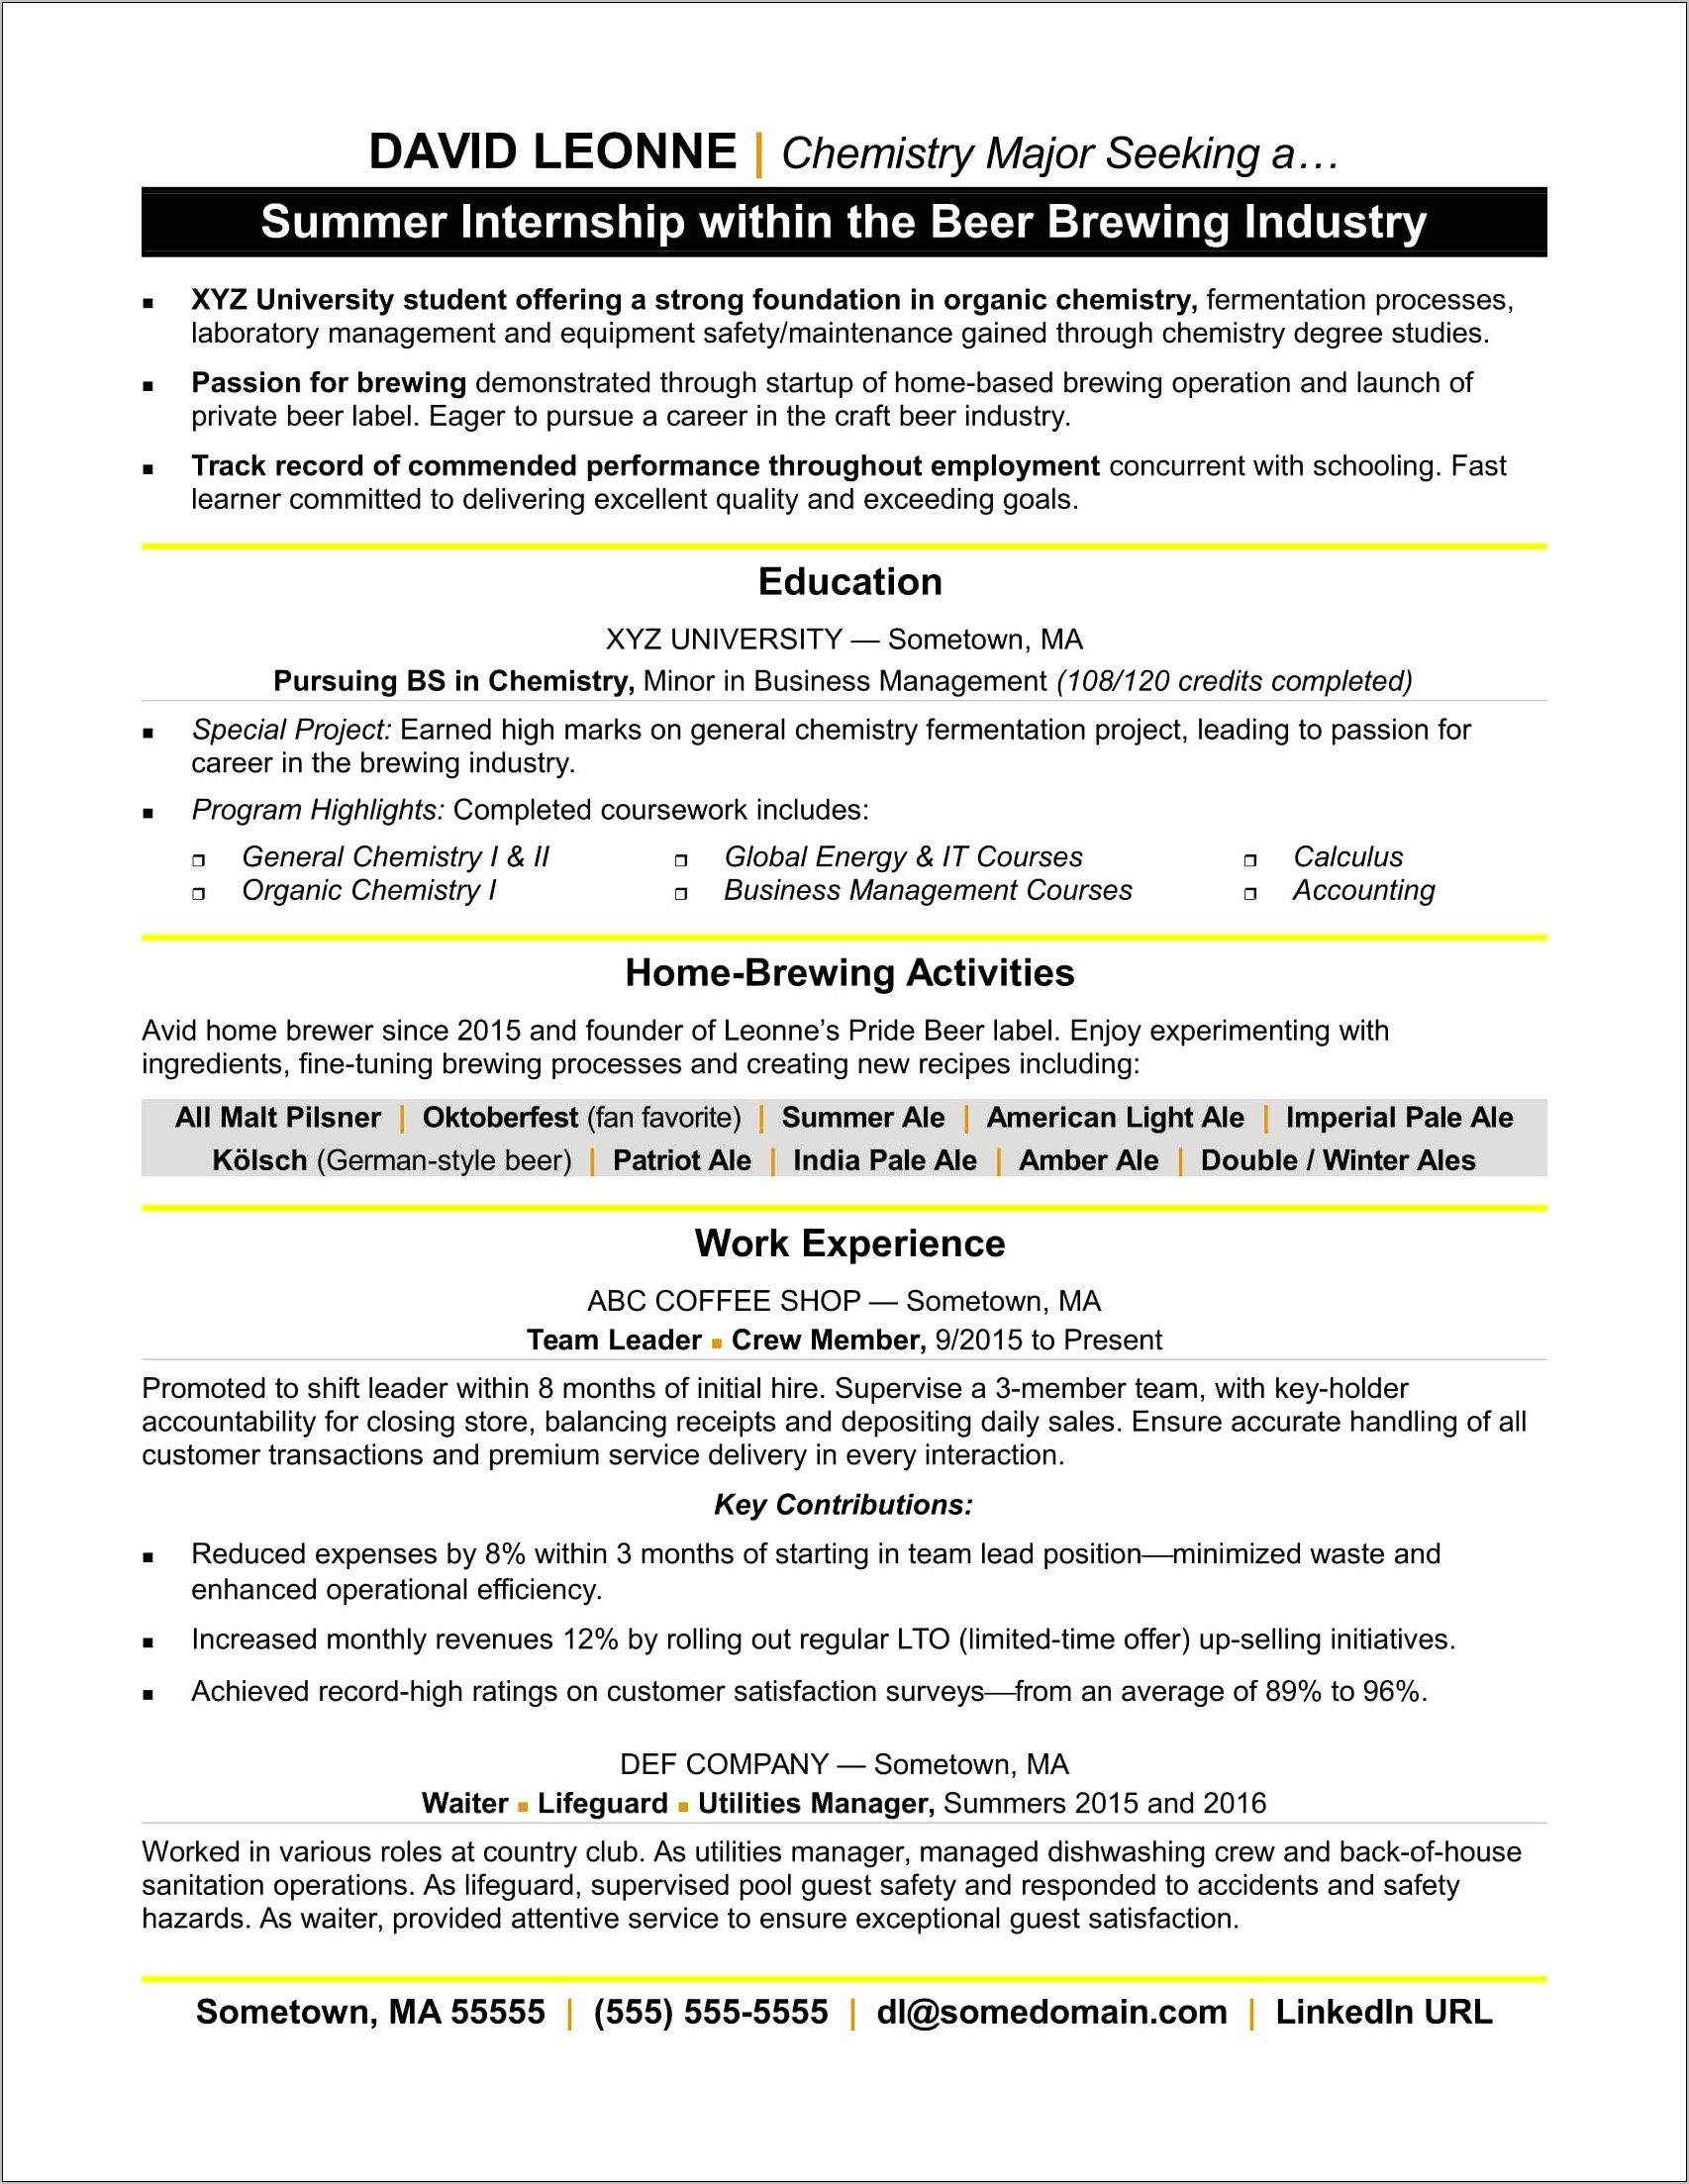 Sample Resume For Club Manager